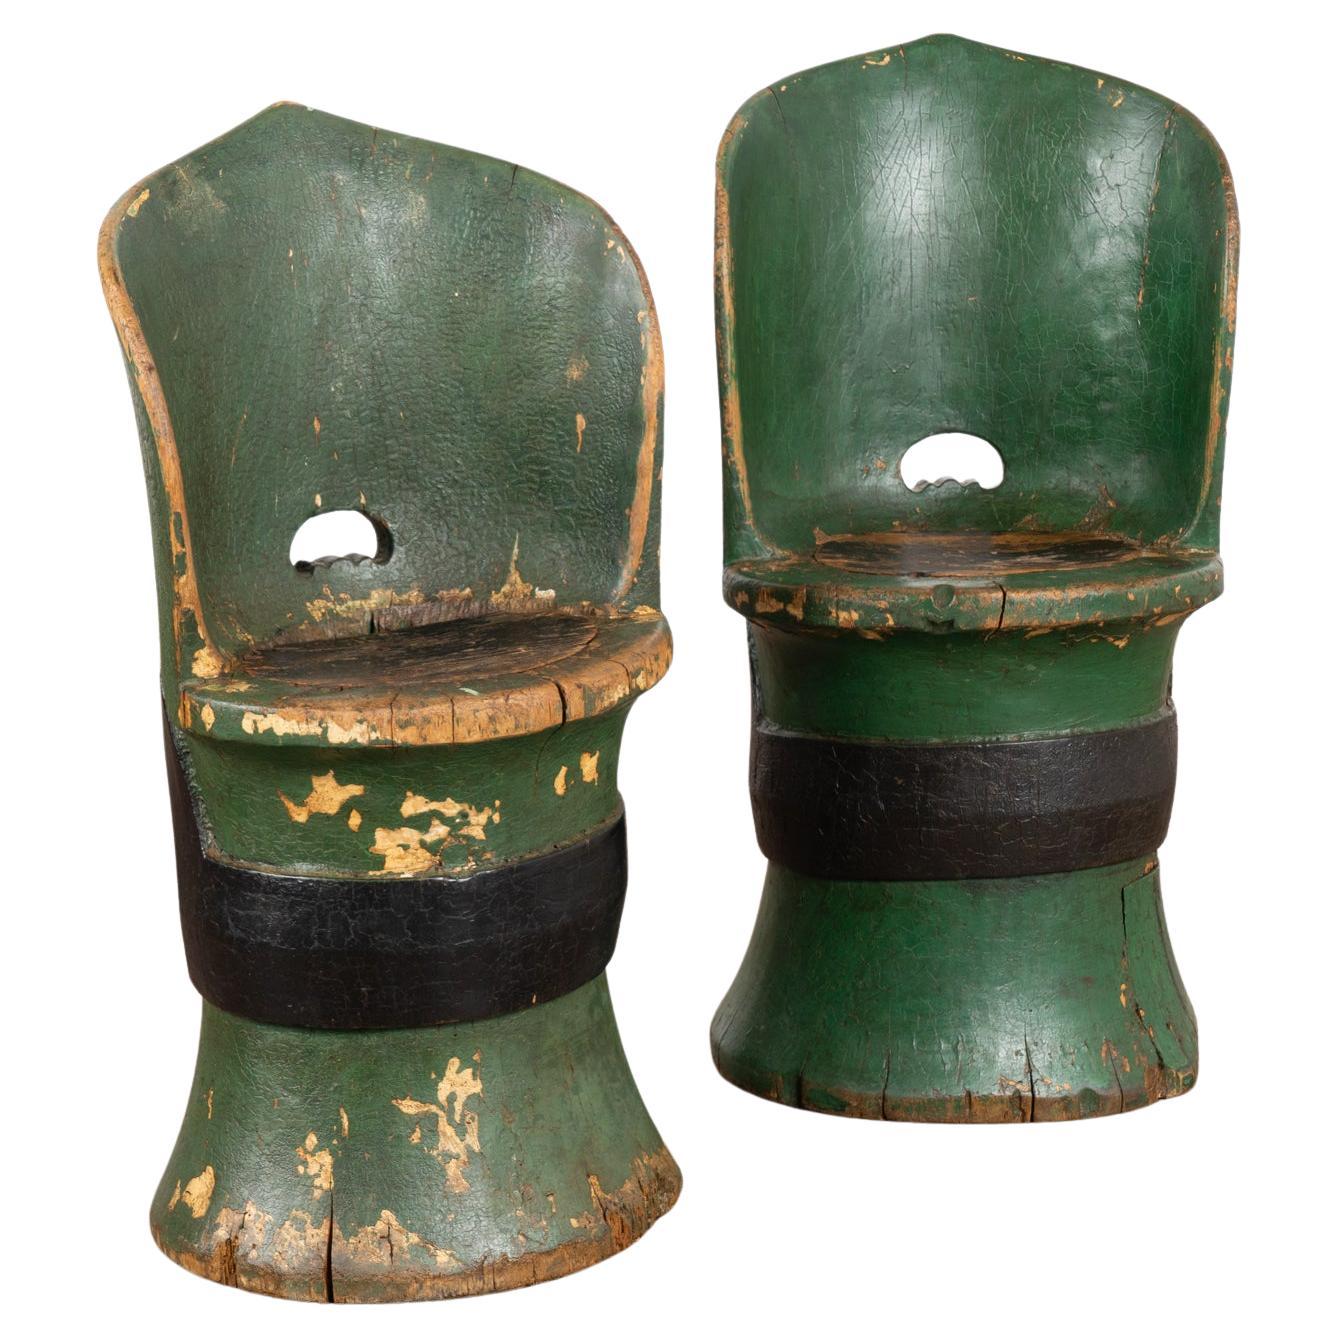 Pair of Original Green Painted Kubbestol Chairs, Sweden circa 1880 For Sale